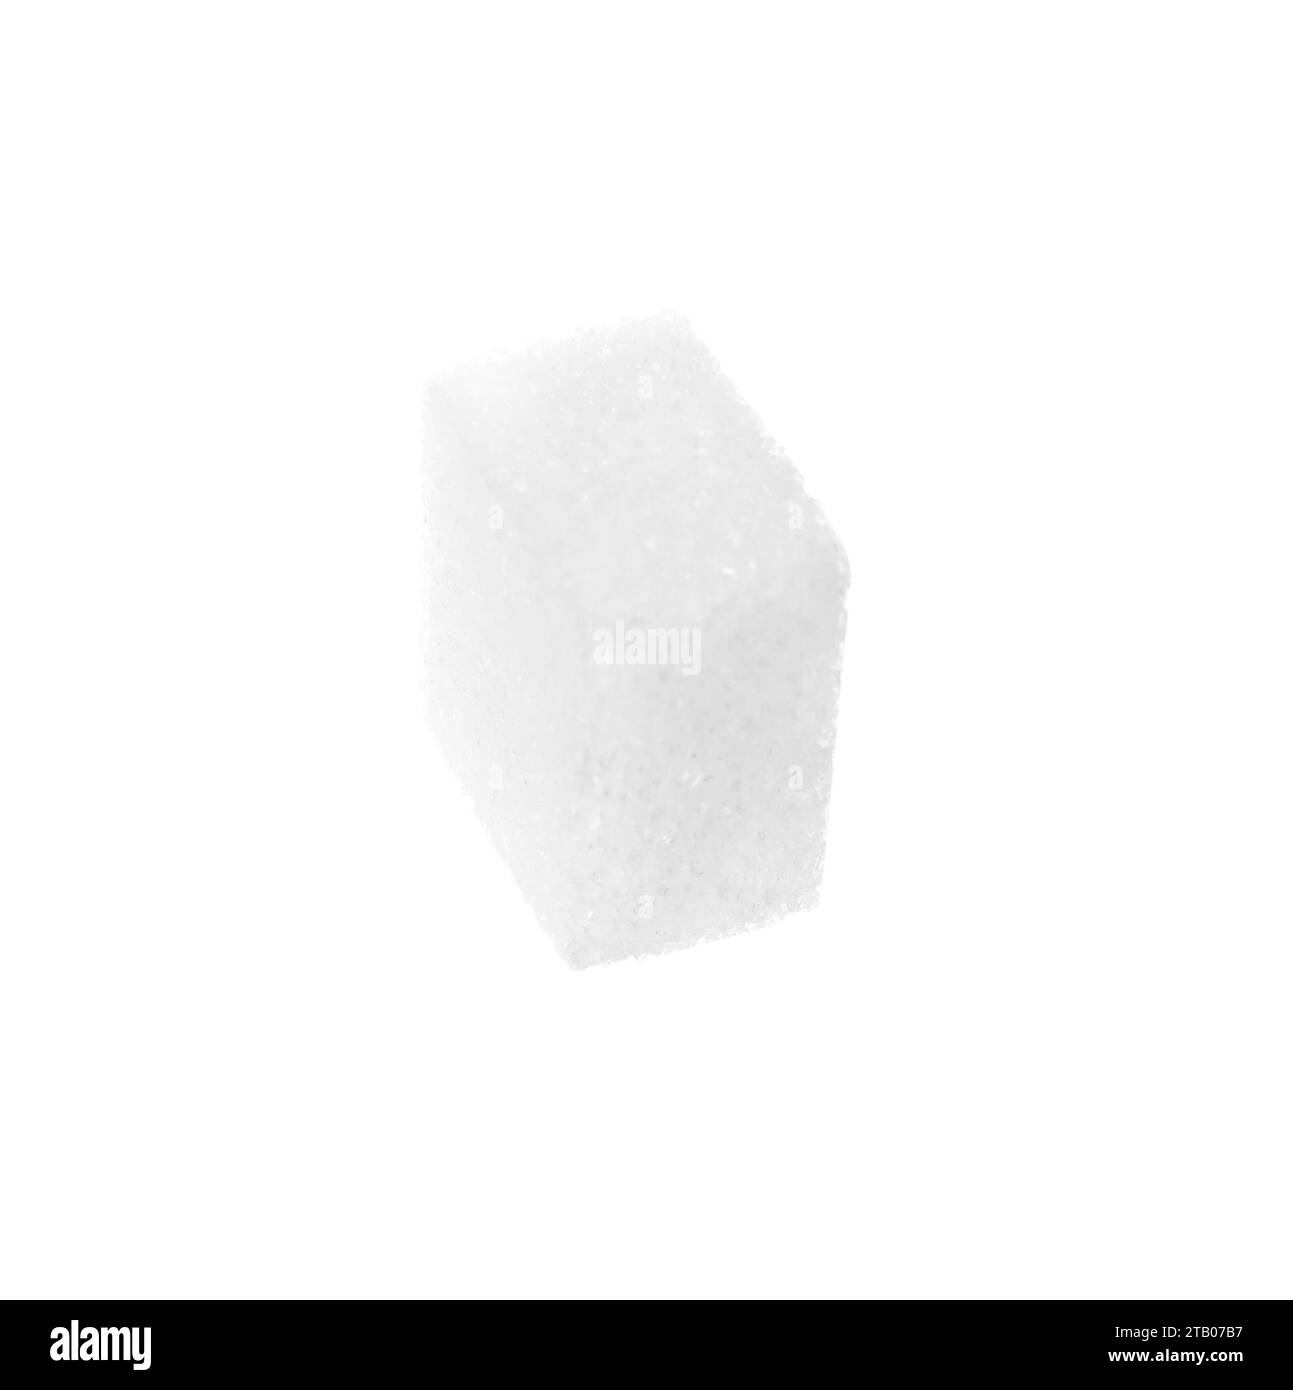 One refined sugar cube isolated on white Stock Photo